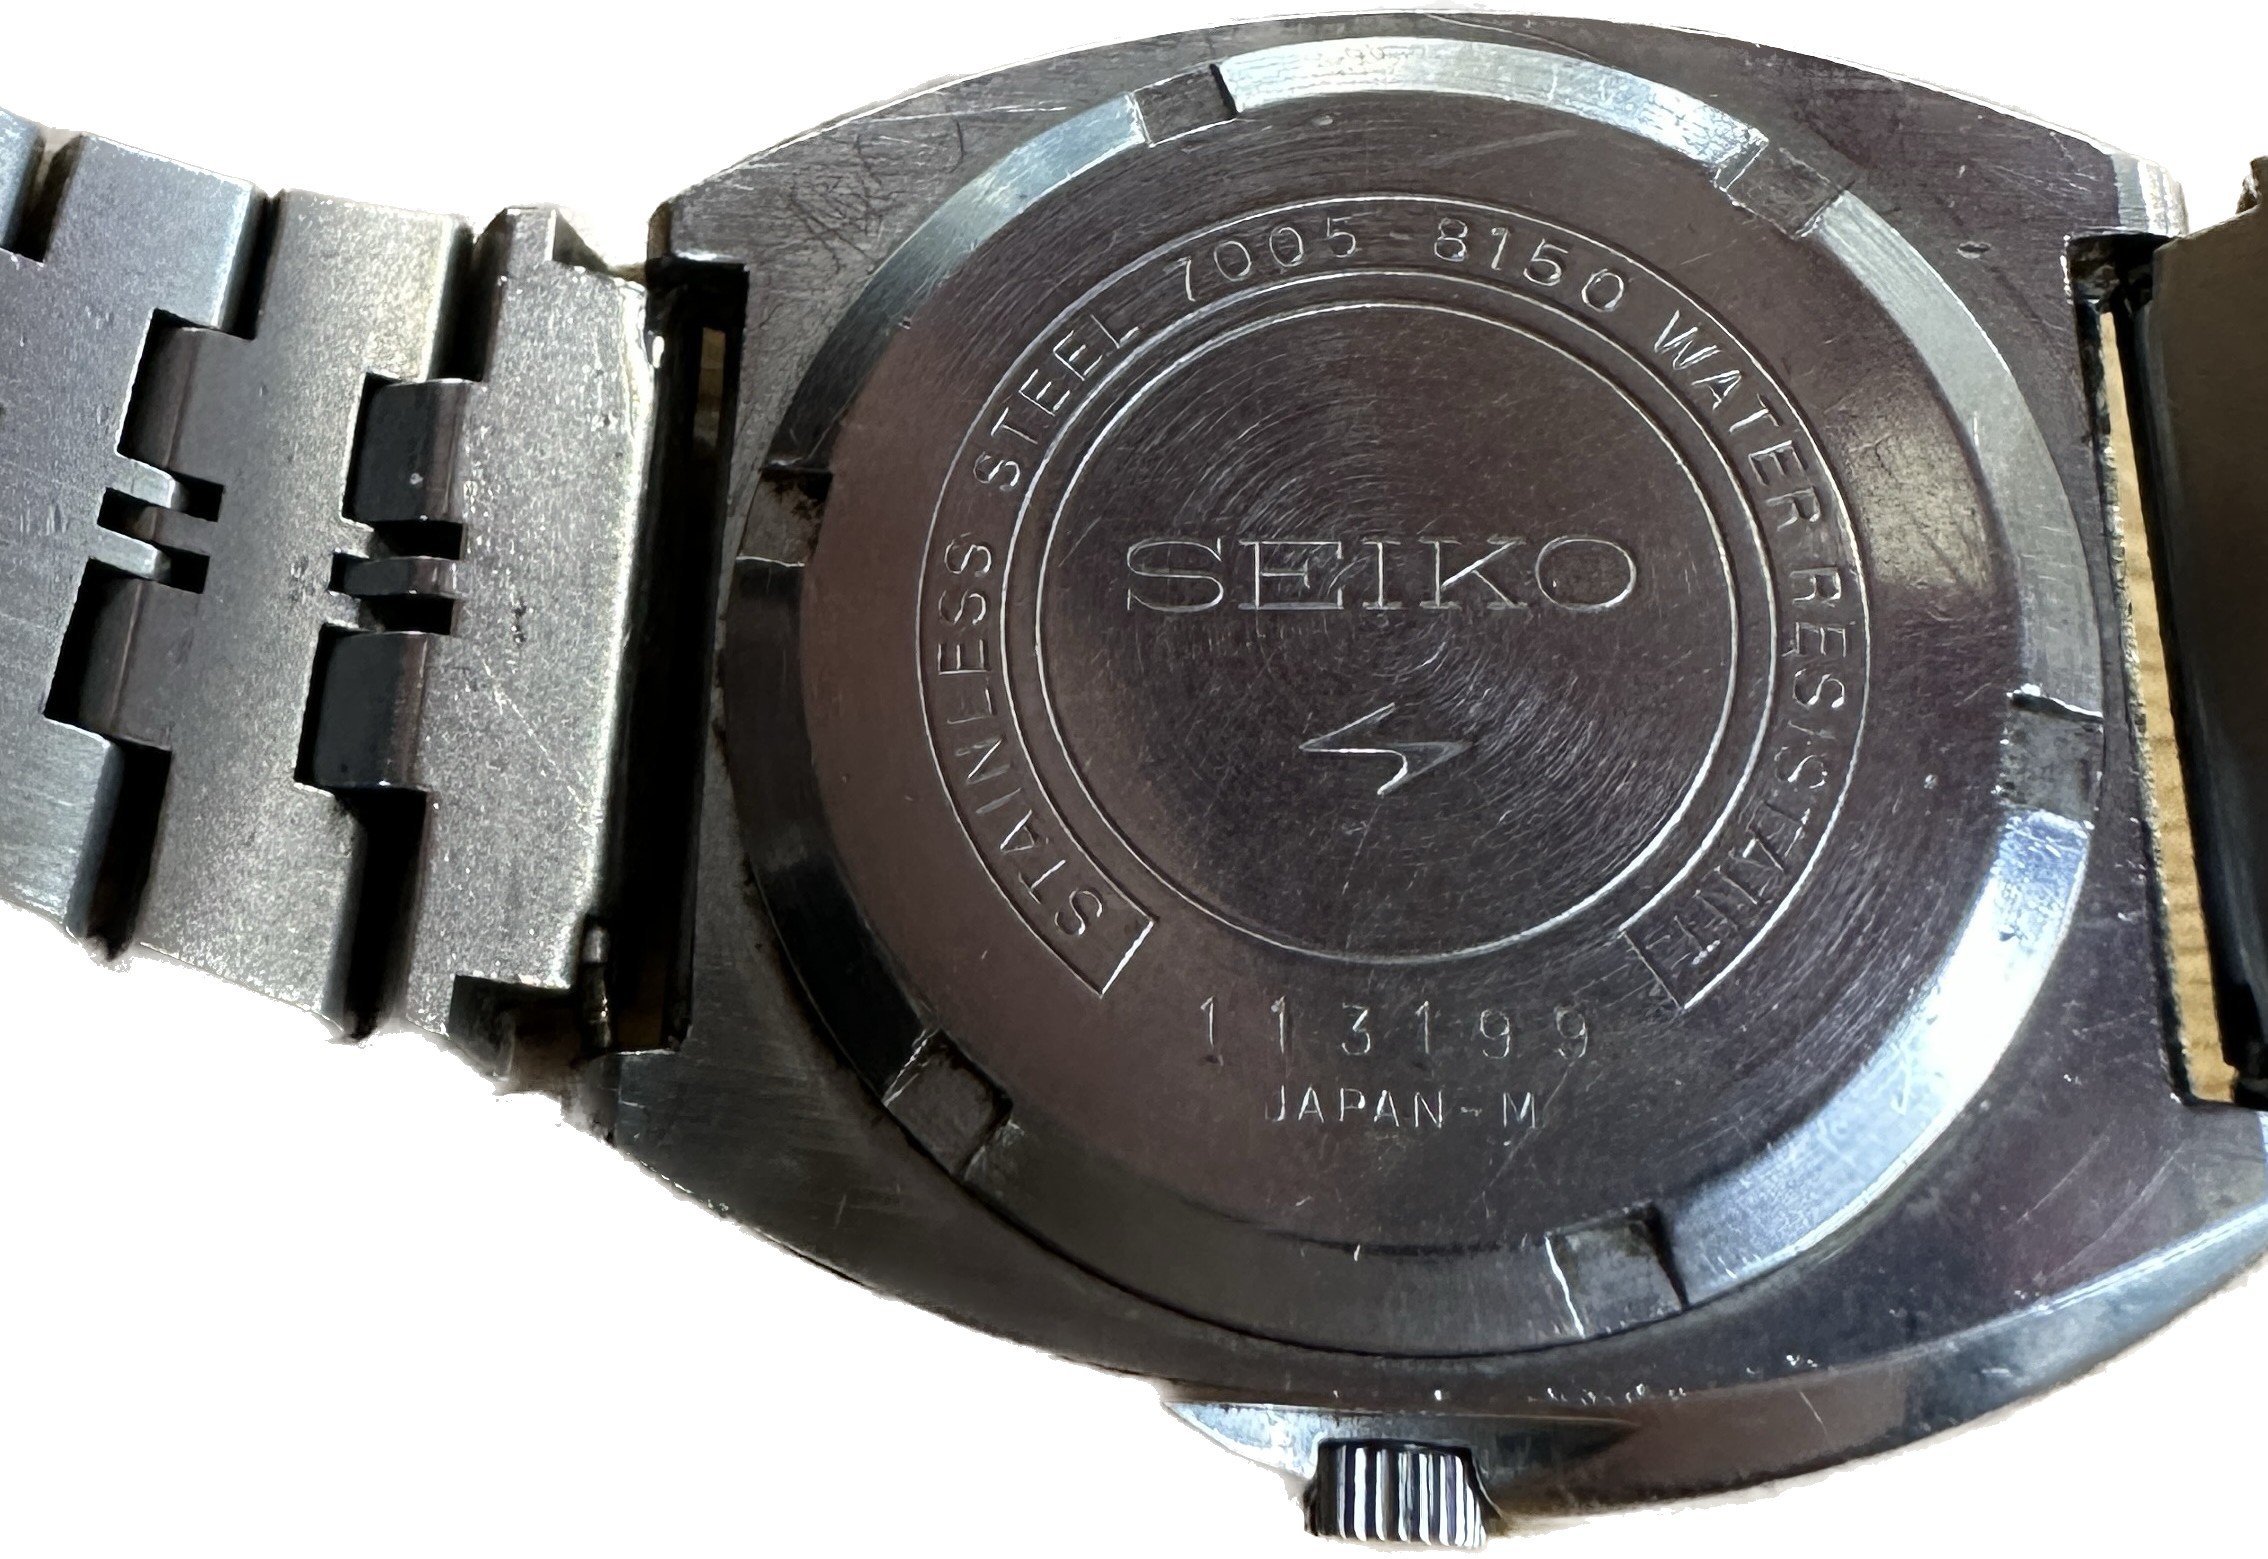 Gents Seiko wrist watch - no warranty given, in need of a new bezel - Image 2 of 5